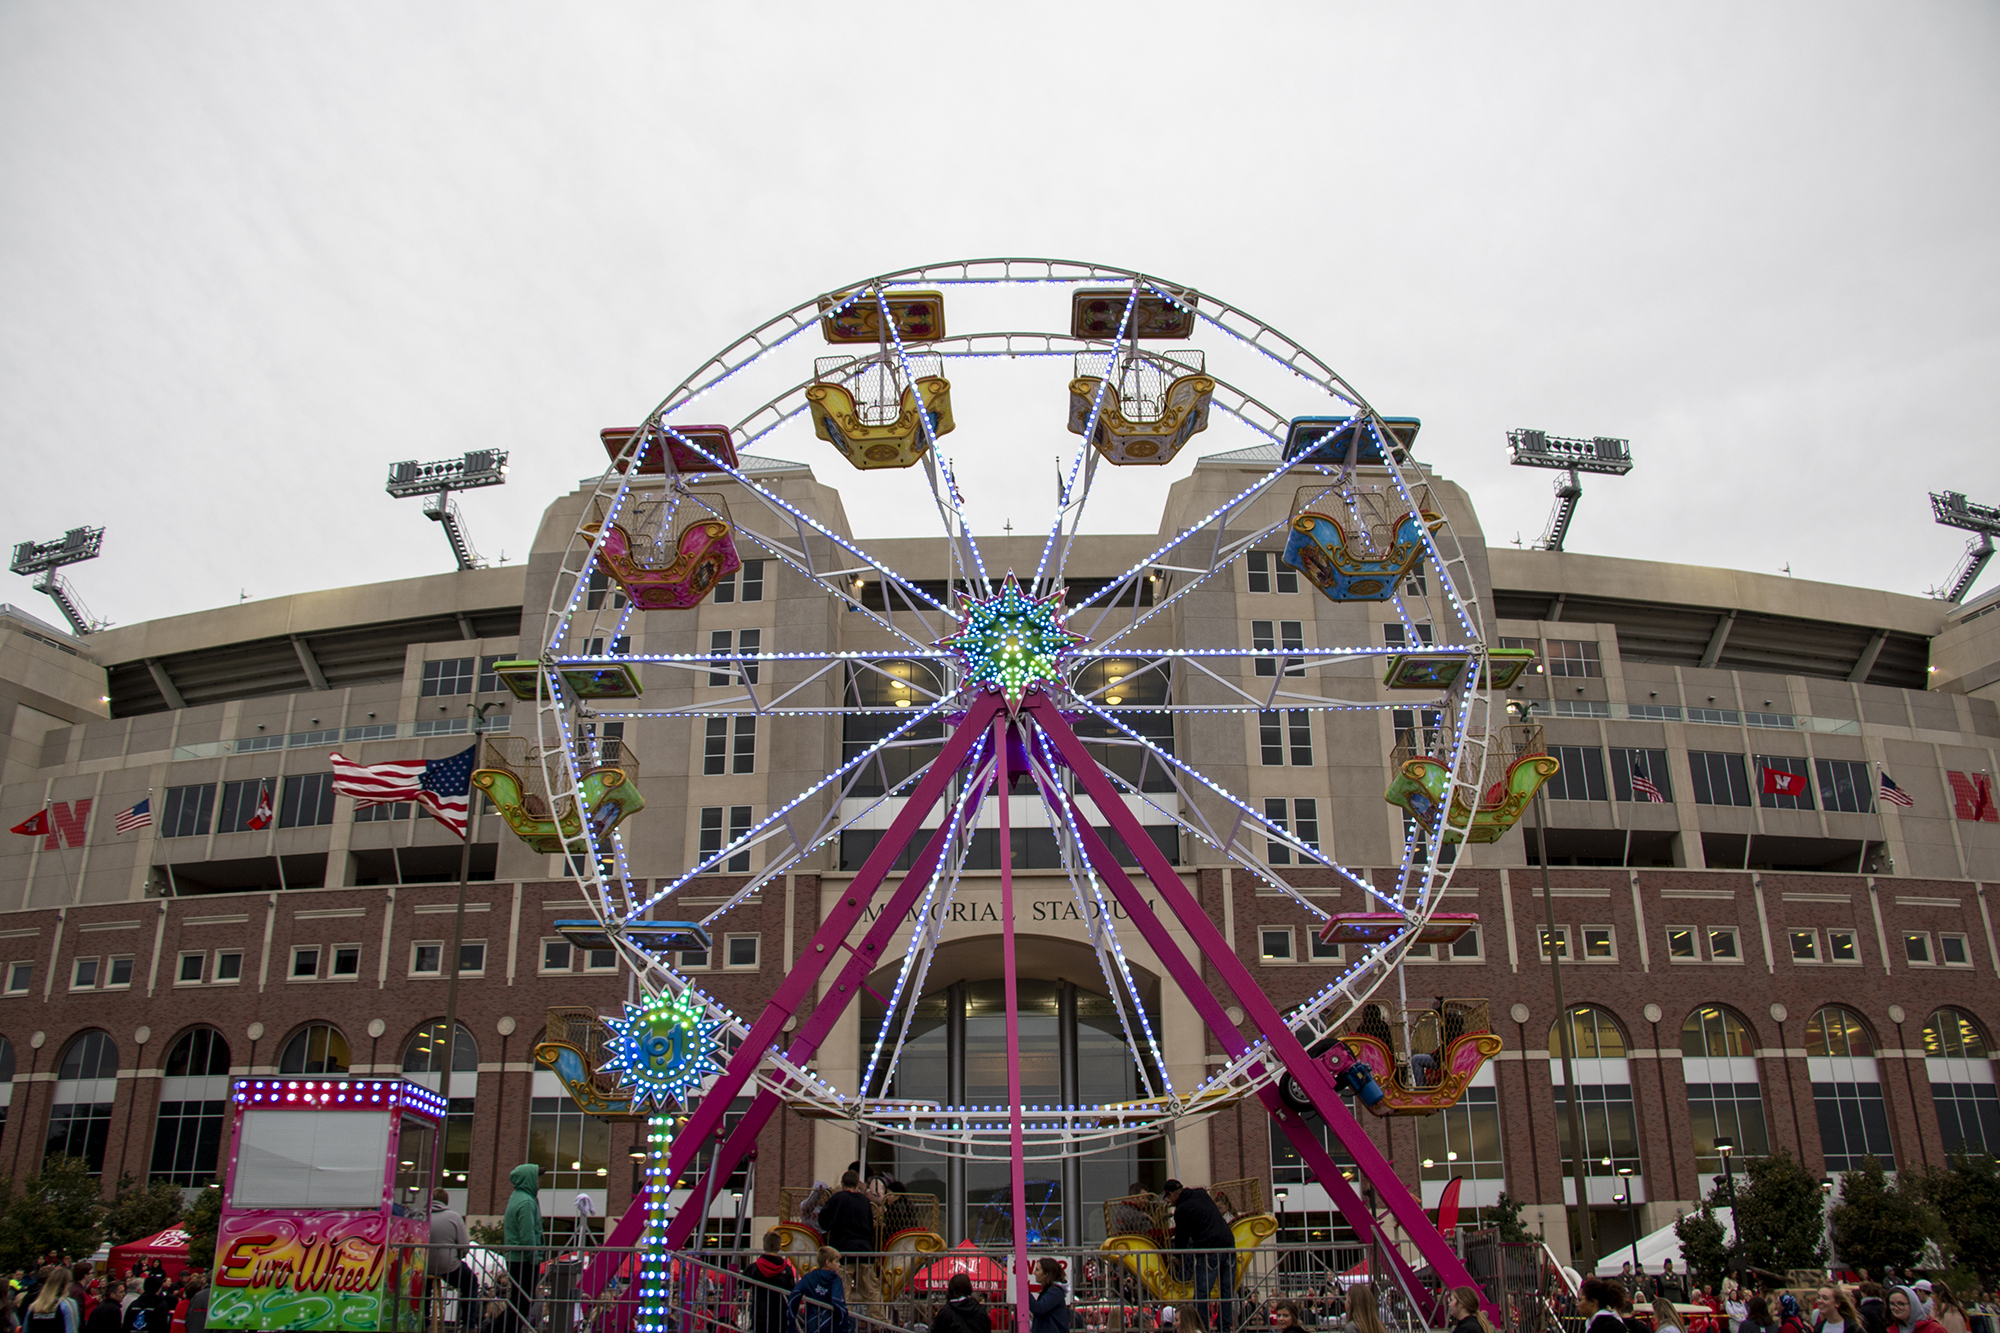 Prior to the annual Homecoming Parade, the Cornstock Festival will feature food trucks, a Ferris wheel, and lots of games.